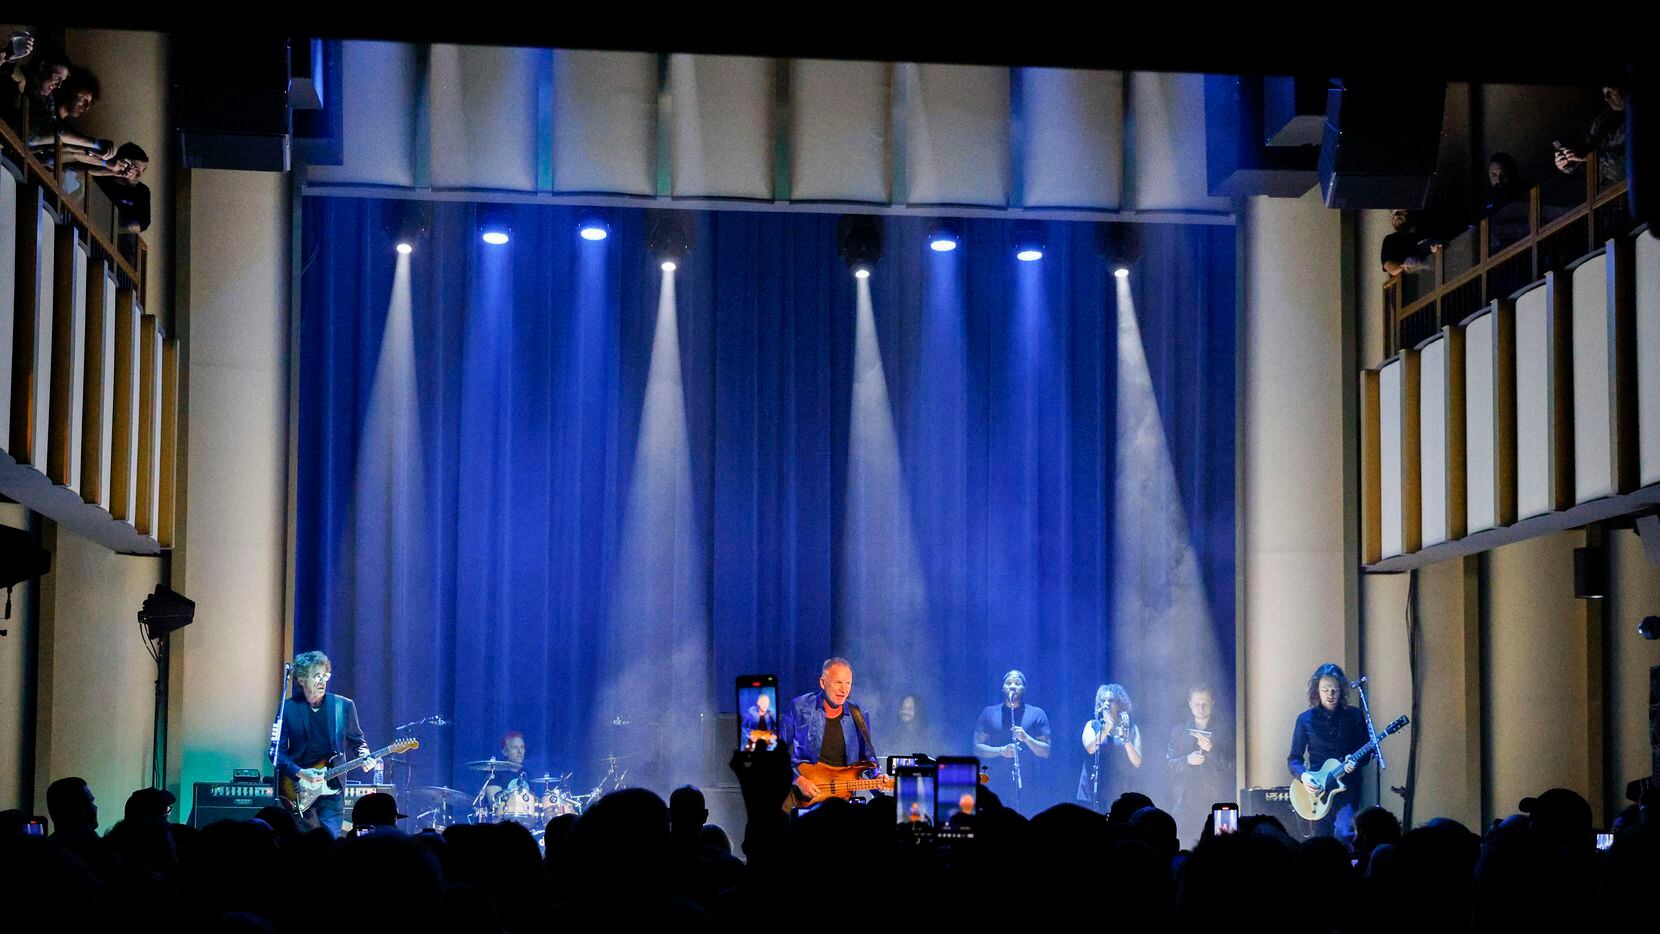 The Echo Lounge and Music Hall, backed by Mark Cuban, holds about 1,000 people. Sting is the biggest act it has drawn in about a dozen shows, and his concert marked the venue's official grand opening. 